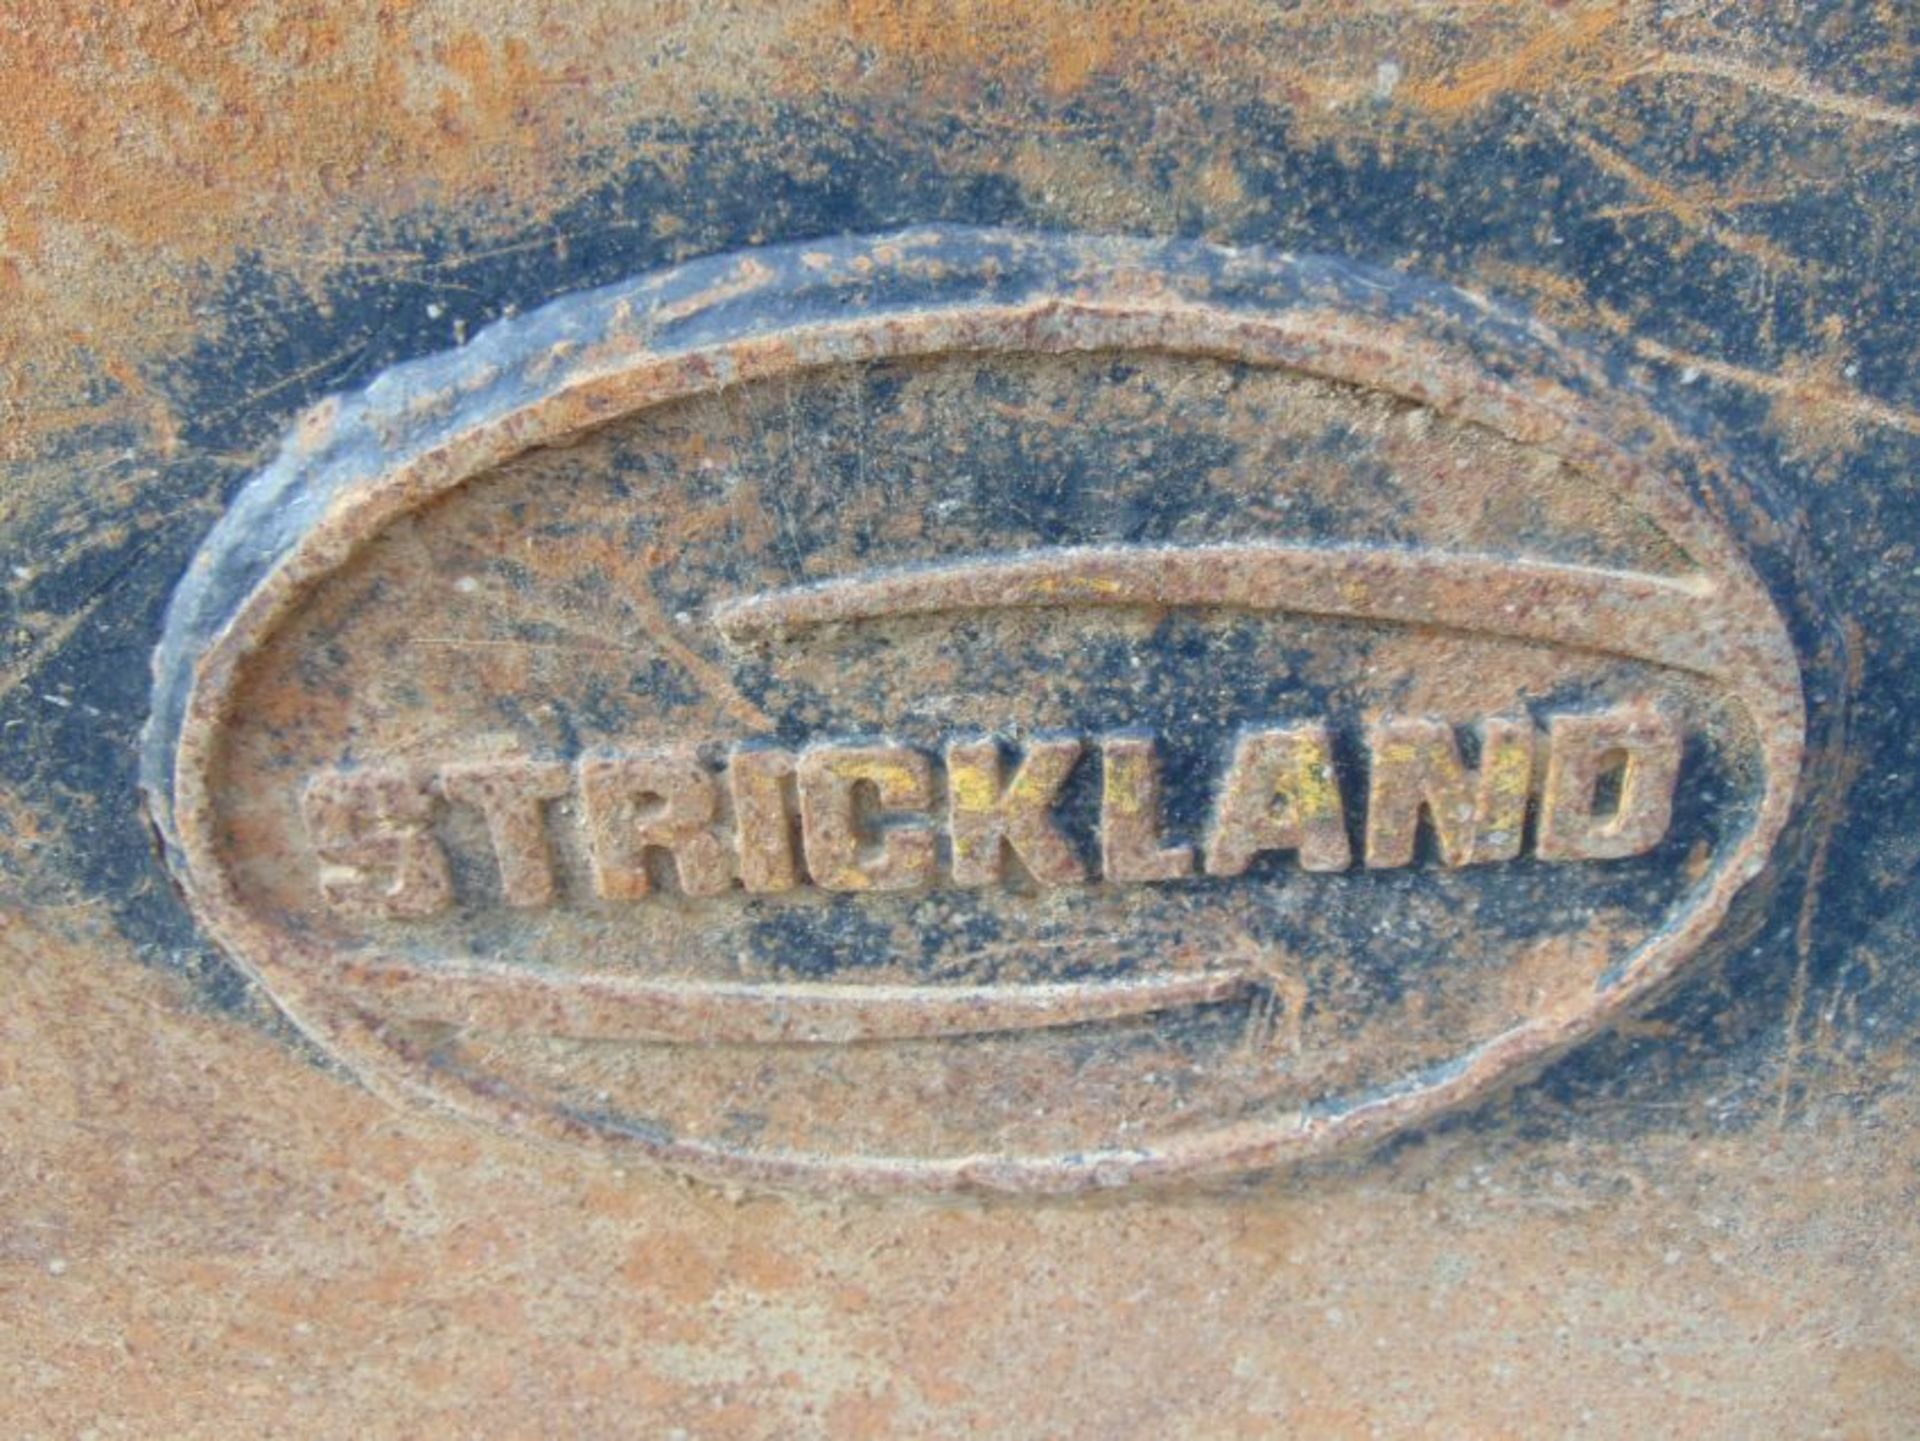 Strickland 23" Digging Bucket 65mm Pin to suit 13 Ton Excavator - Image 6 of 7